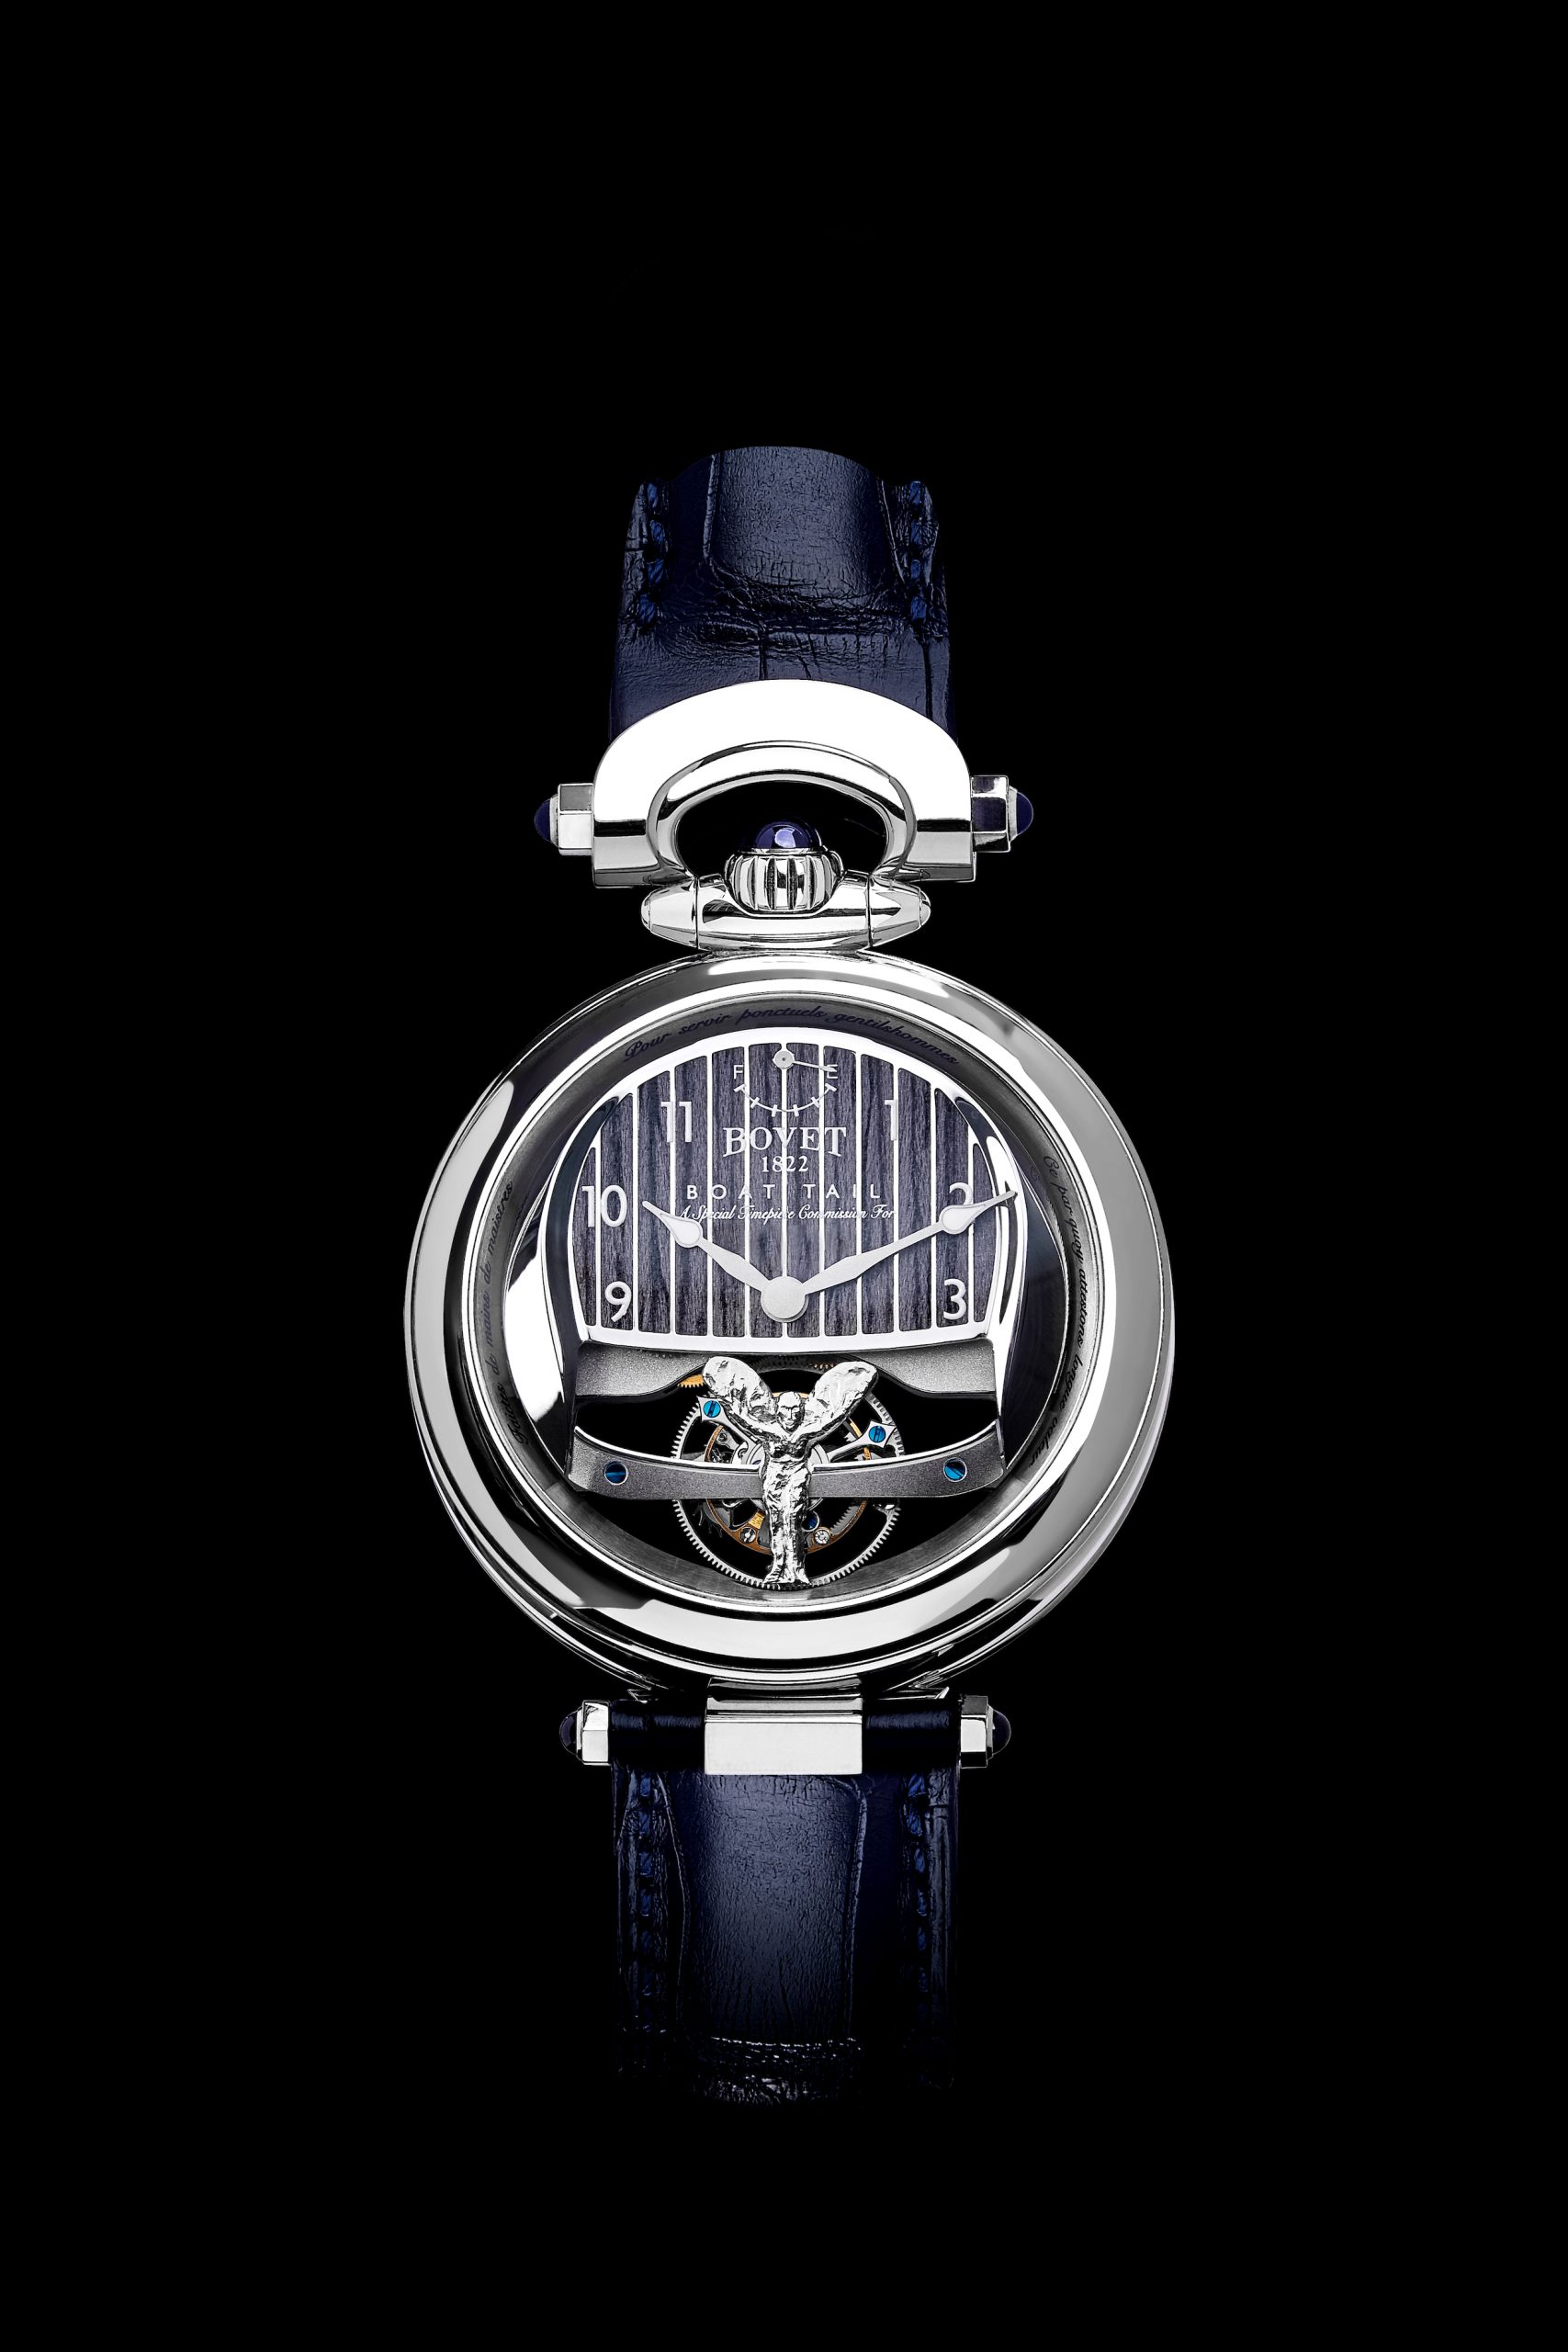 Rolls Royce collaboration - the man’s edition / Photo: Bovet 1822